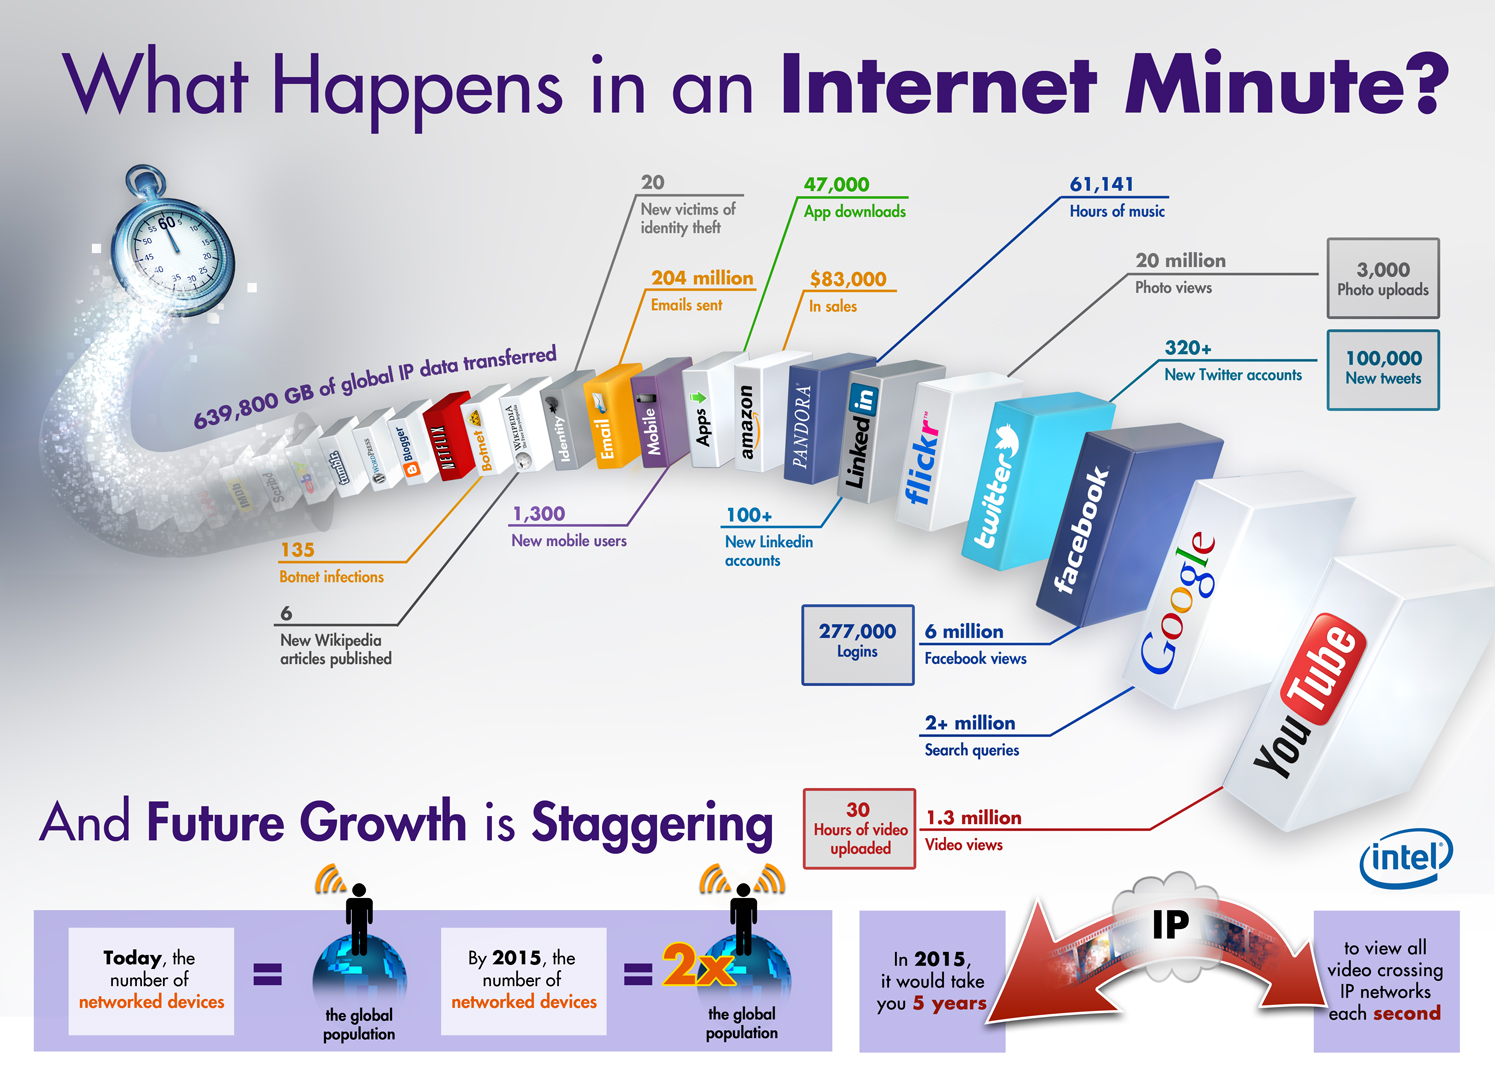 One Internet minute